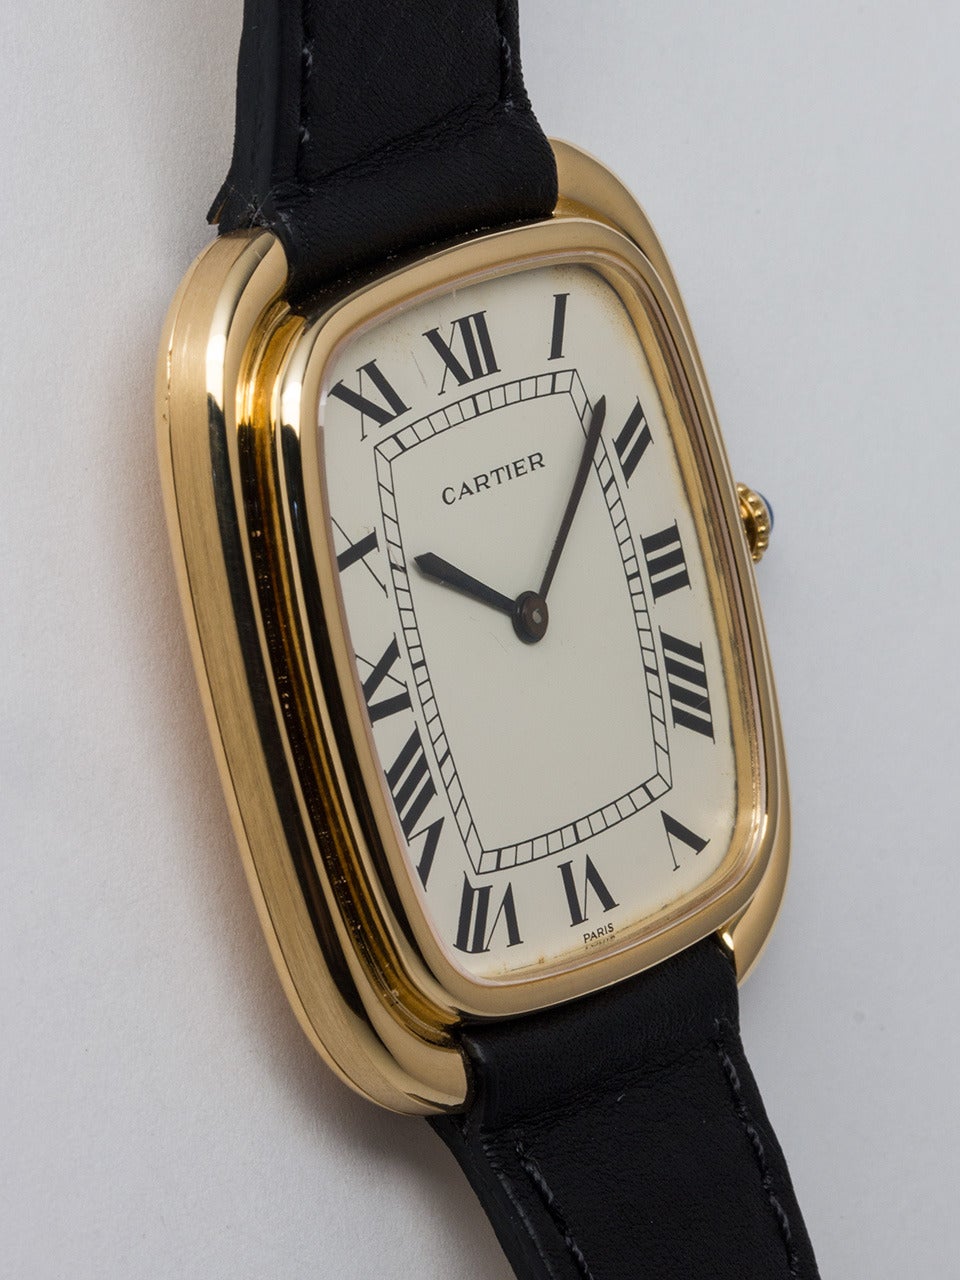 Cartier 18K Yellow Gold Cushion Form Wristwatch, introduced in 1973. Oversized 35 x 40mm case with rounded, stepped bezel design. Very striking and pleasing design with classic white Roman dial, blued steel hands, and cabochon sapphire crown.